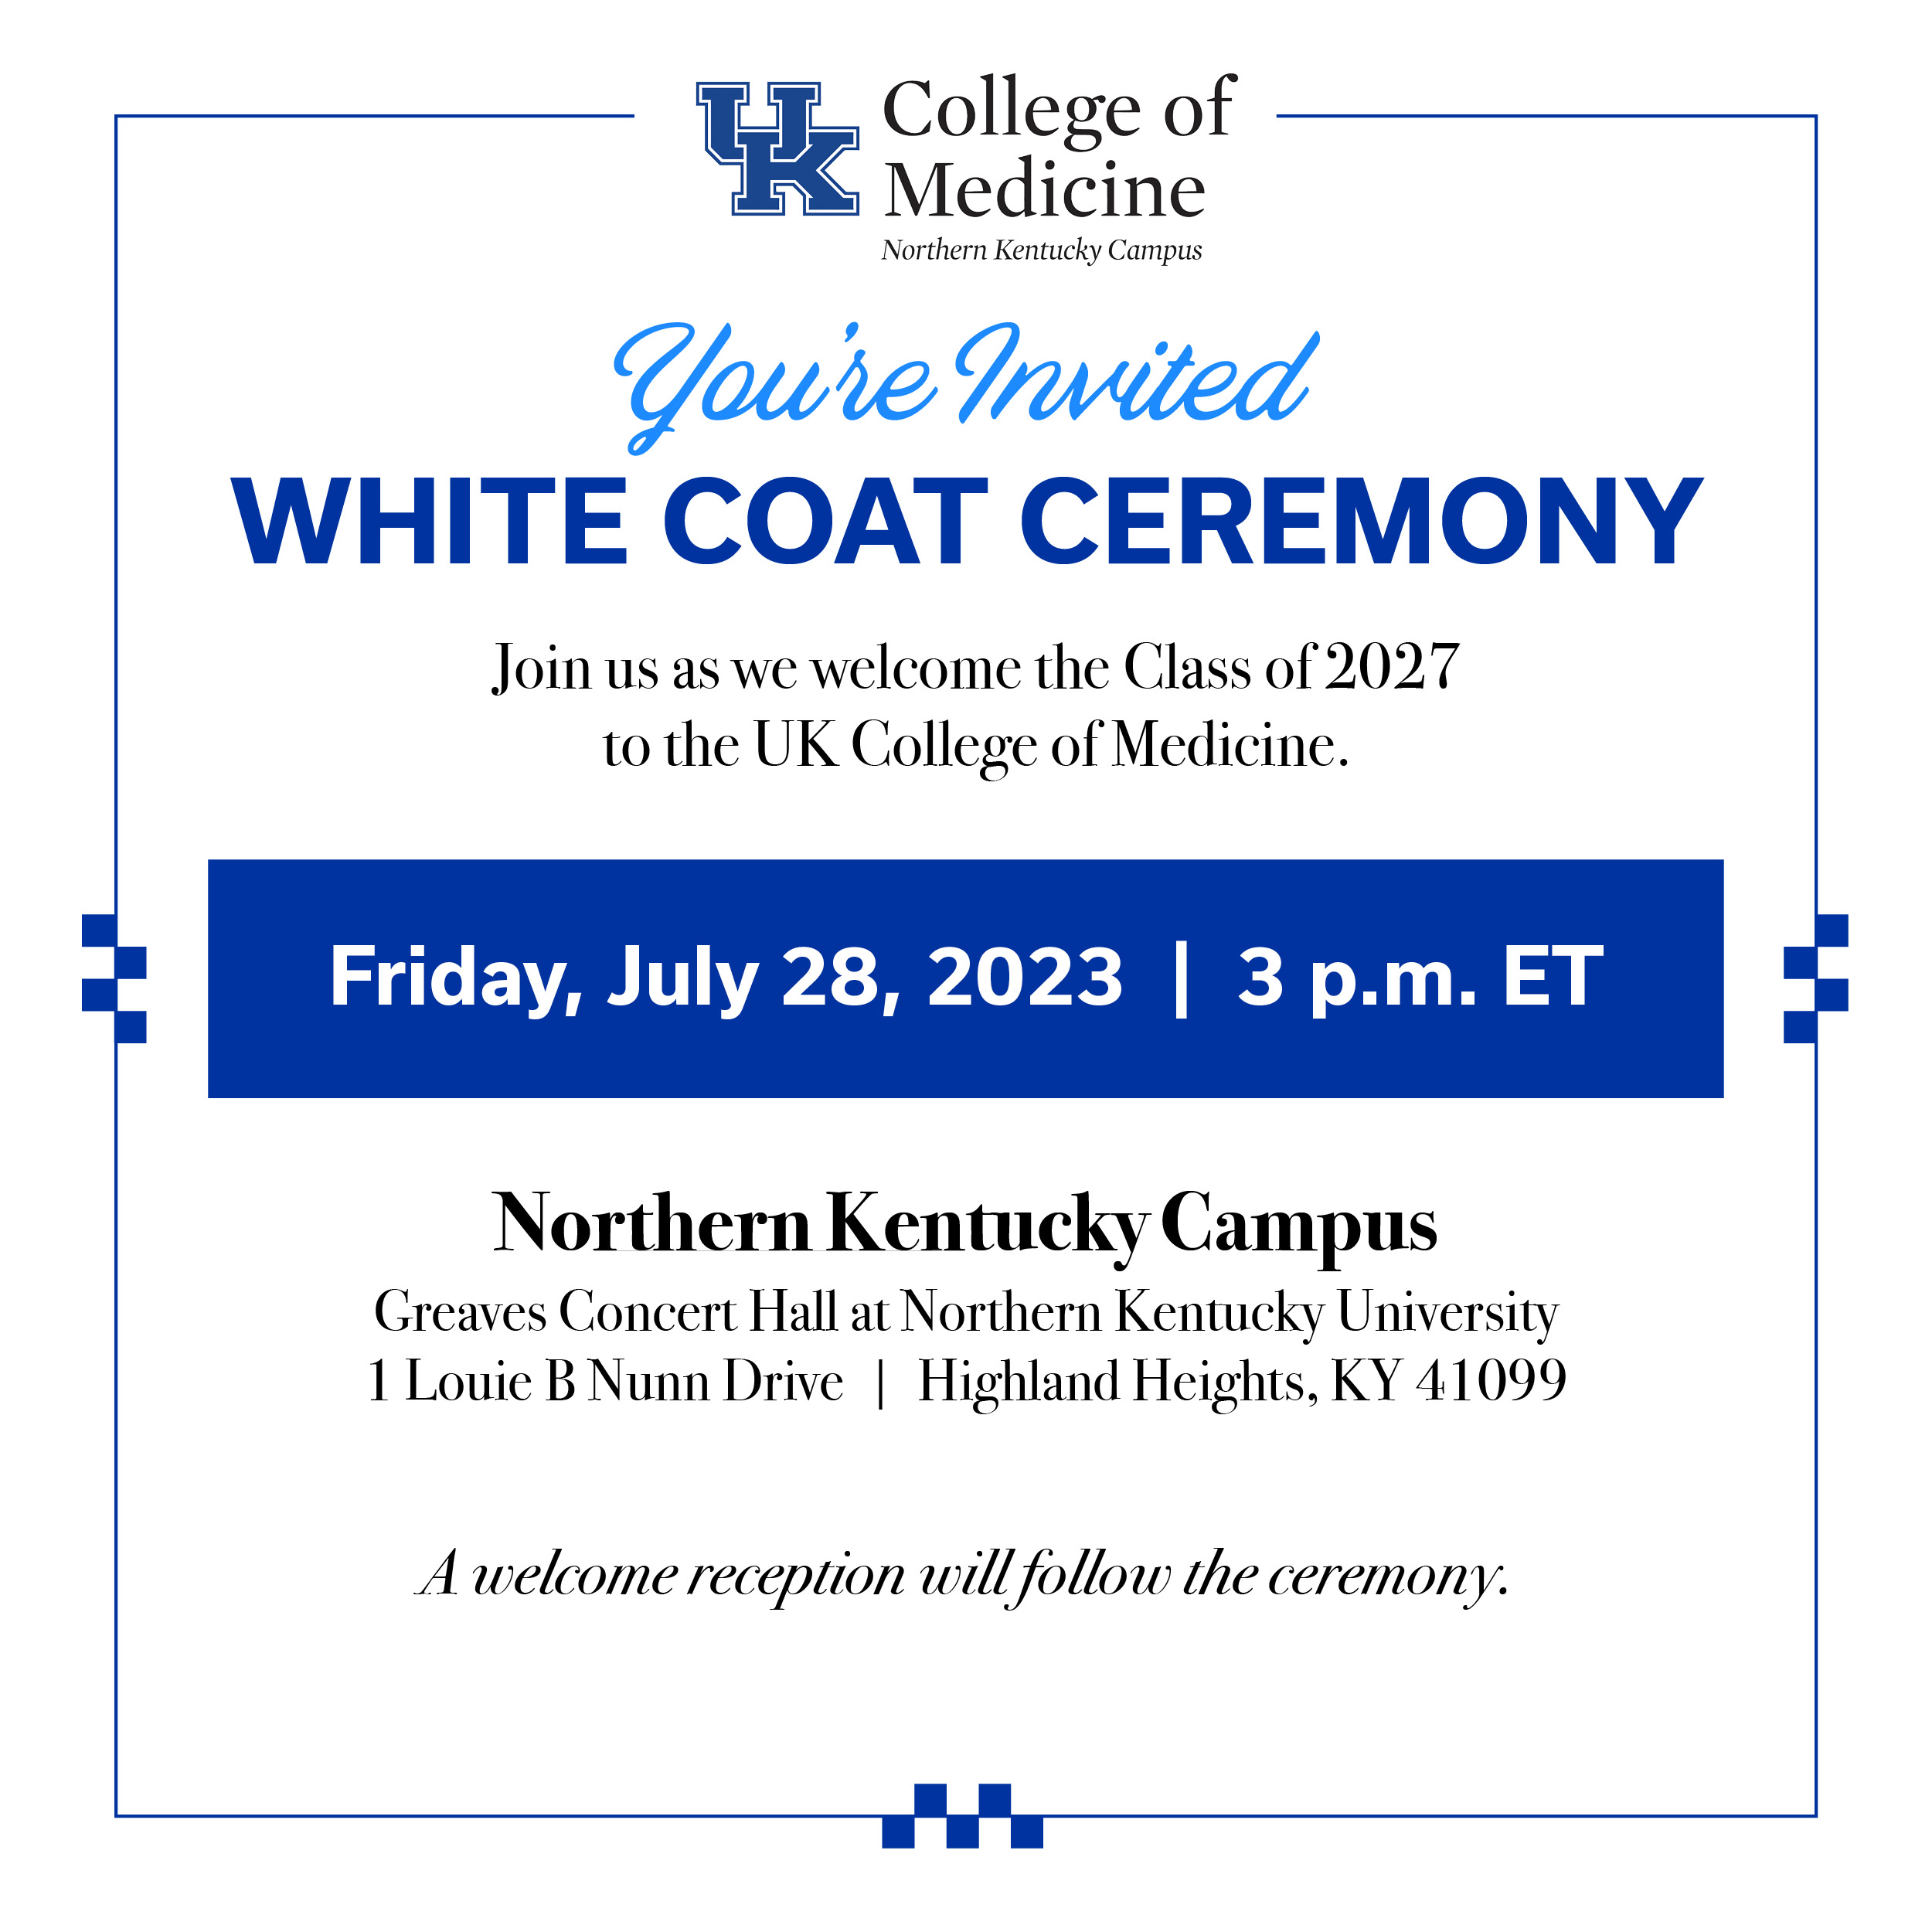 white coat ceremony invite for northern kentucky campus